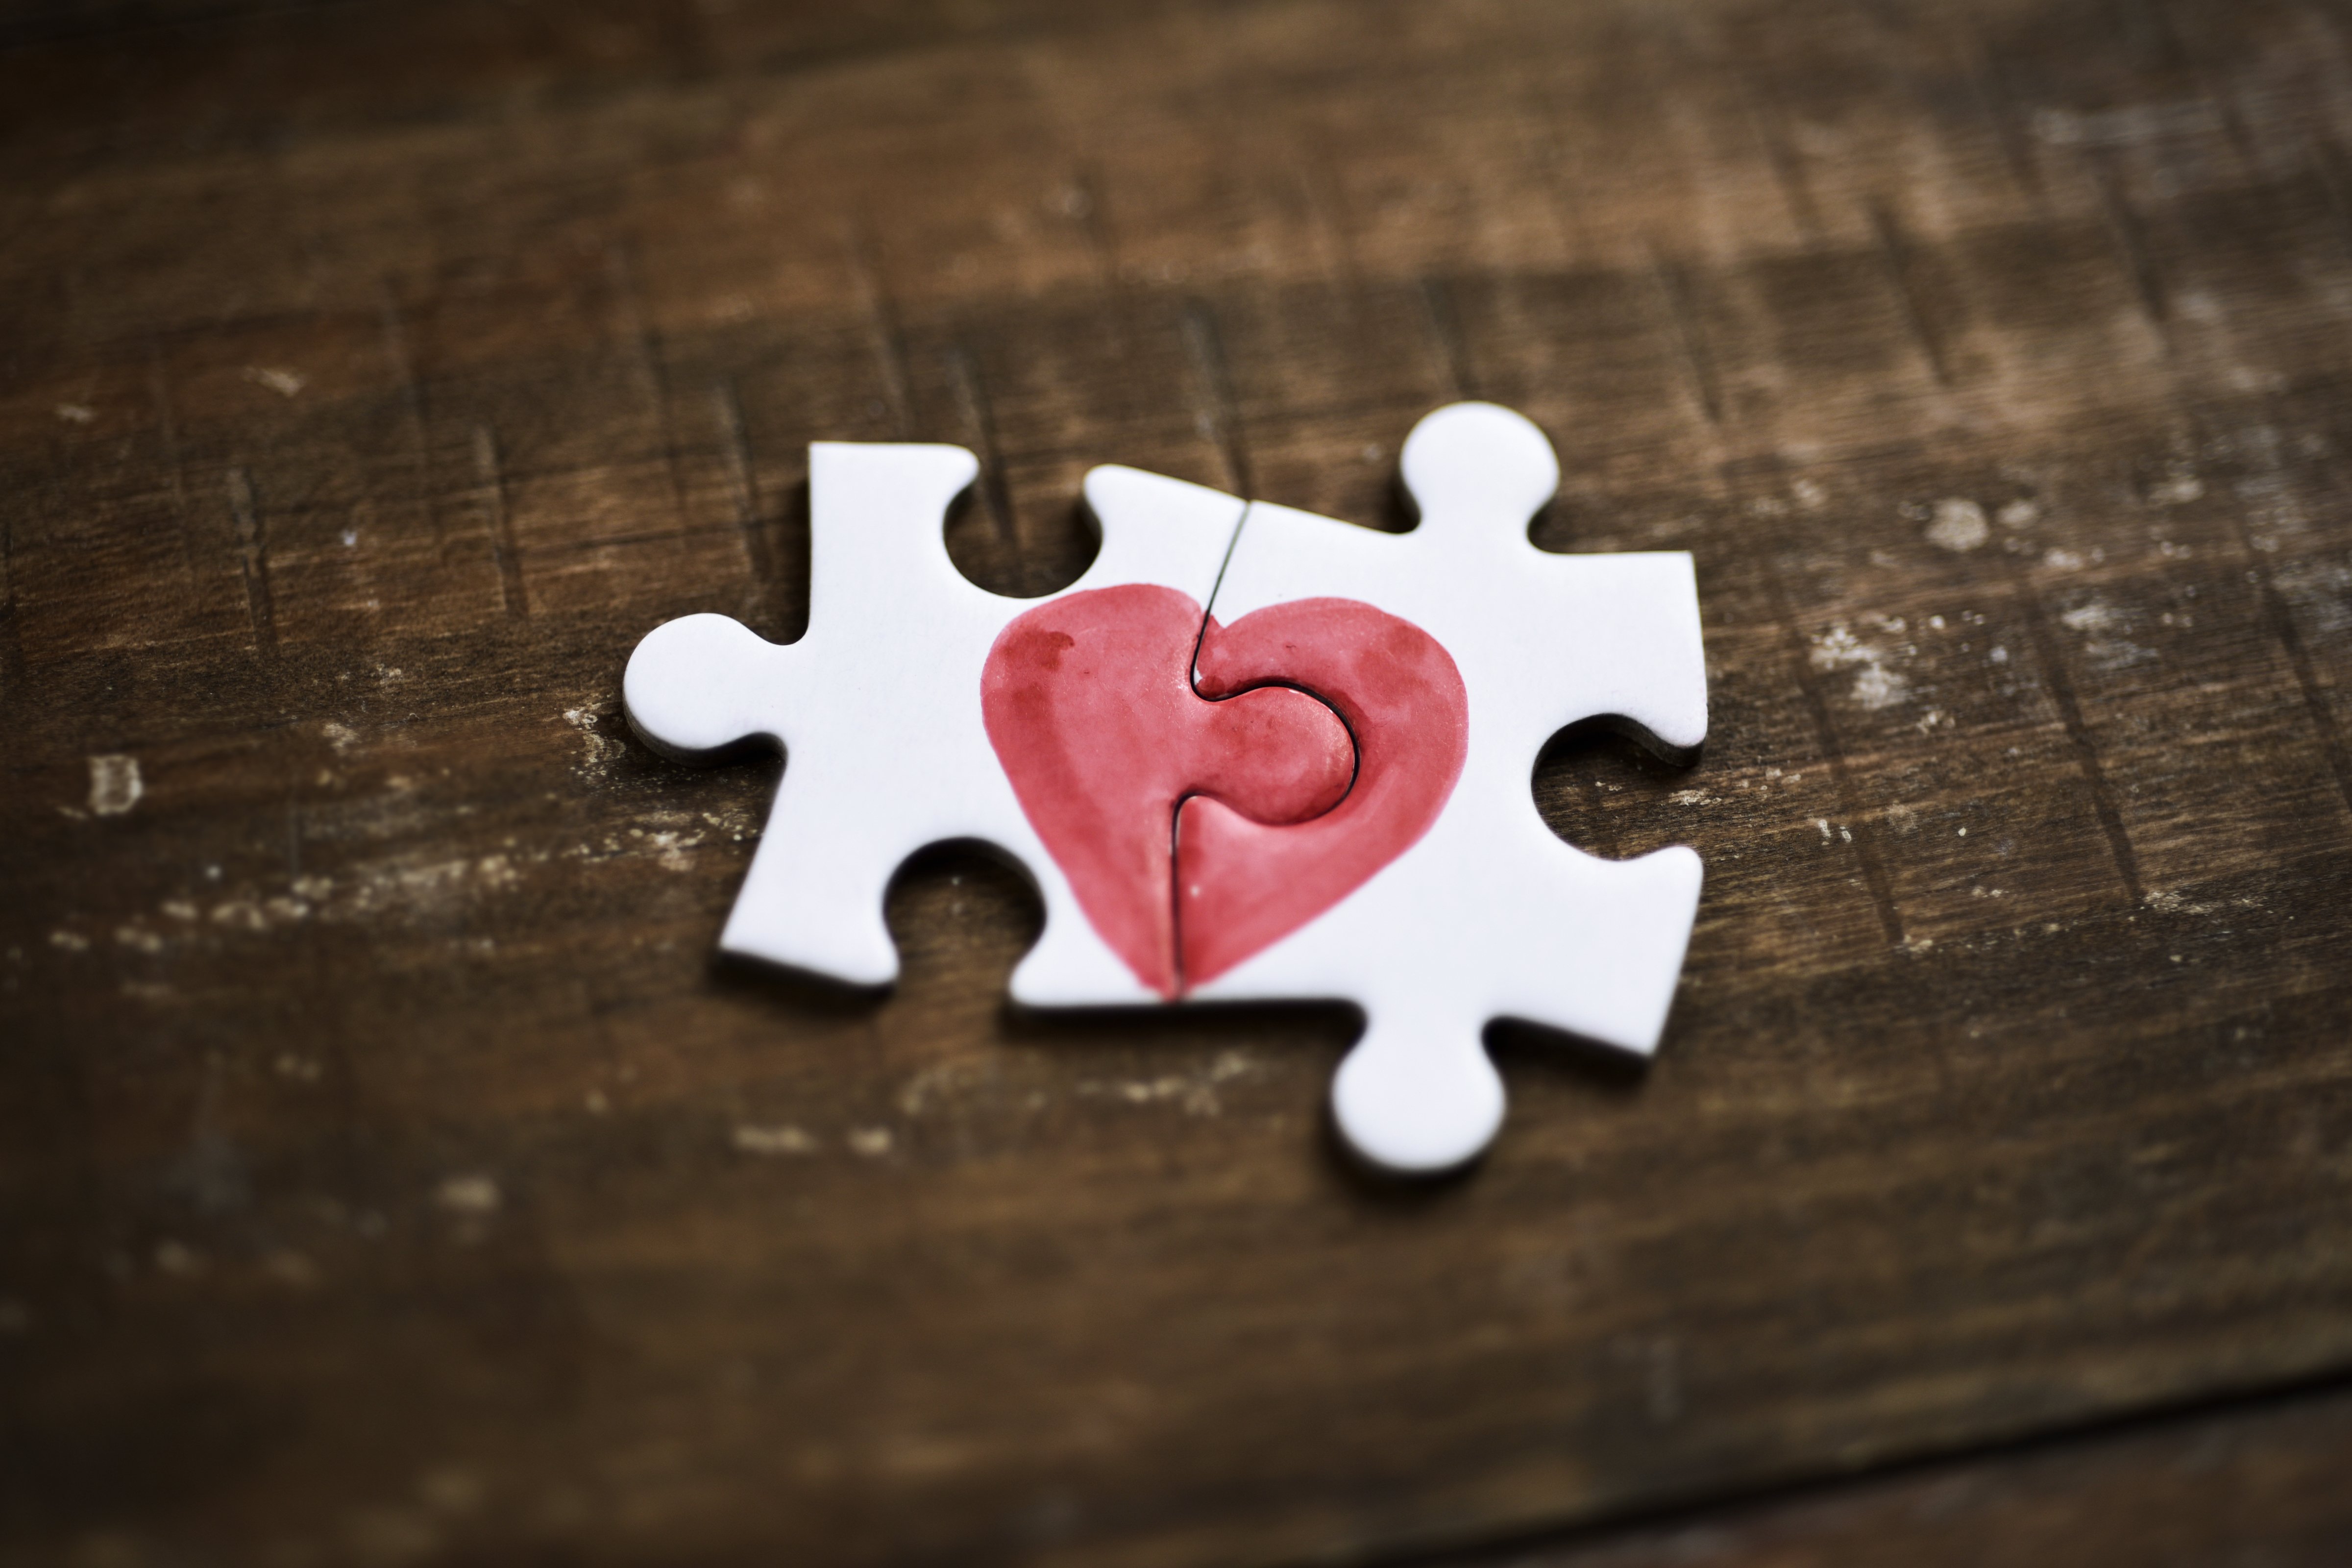 Close-up of two pieces of a puzzle forming a heart on a rustic wooden surface, depicting the idea of that love is a thing of two. │Source: Shutterstock